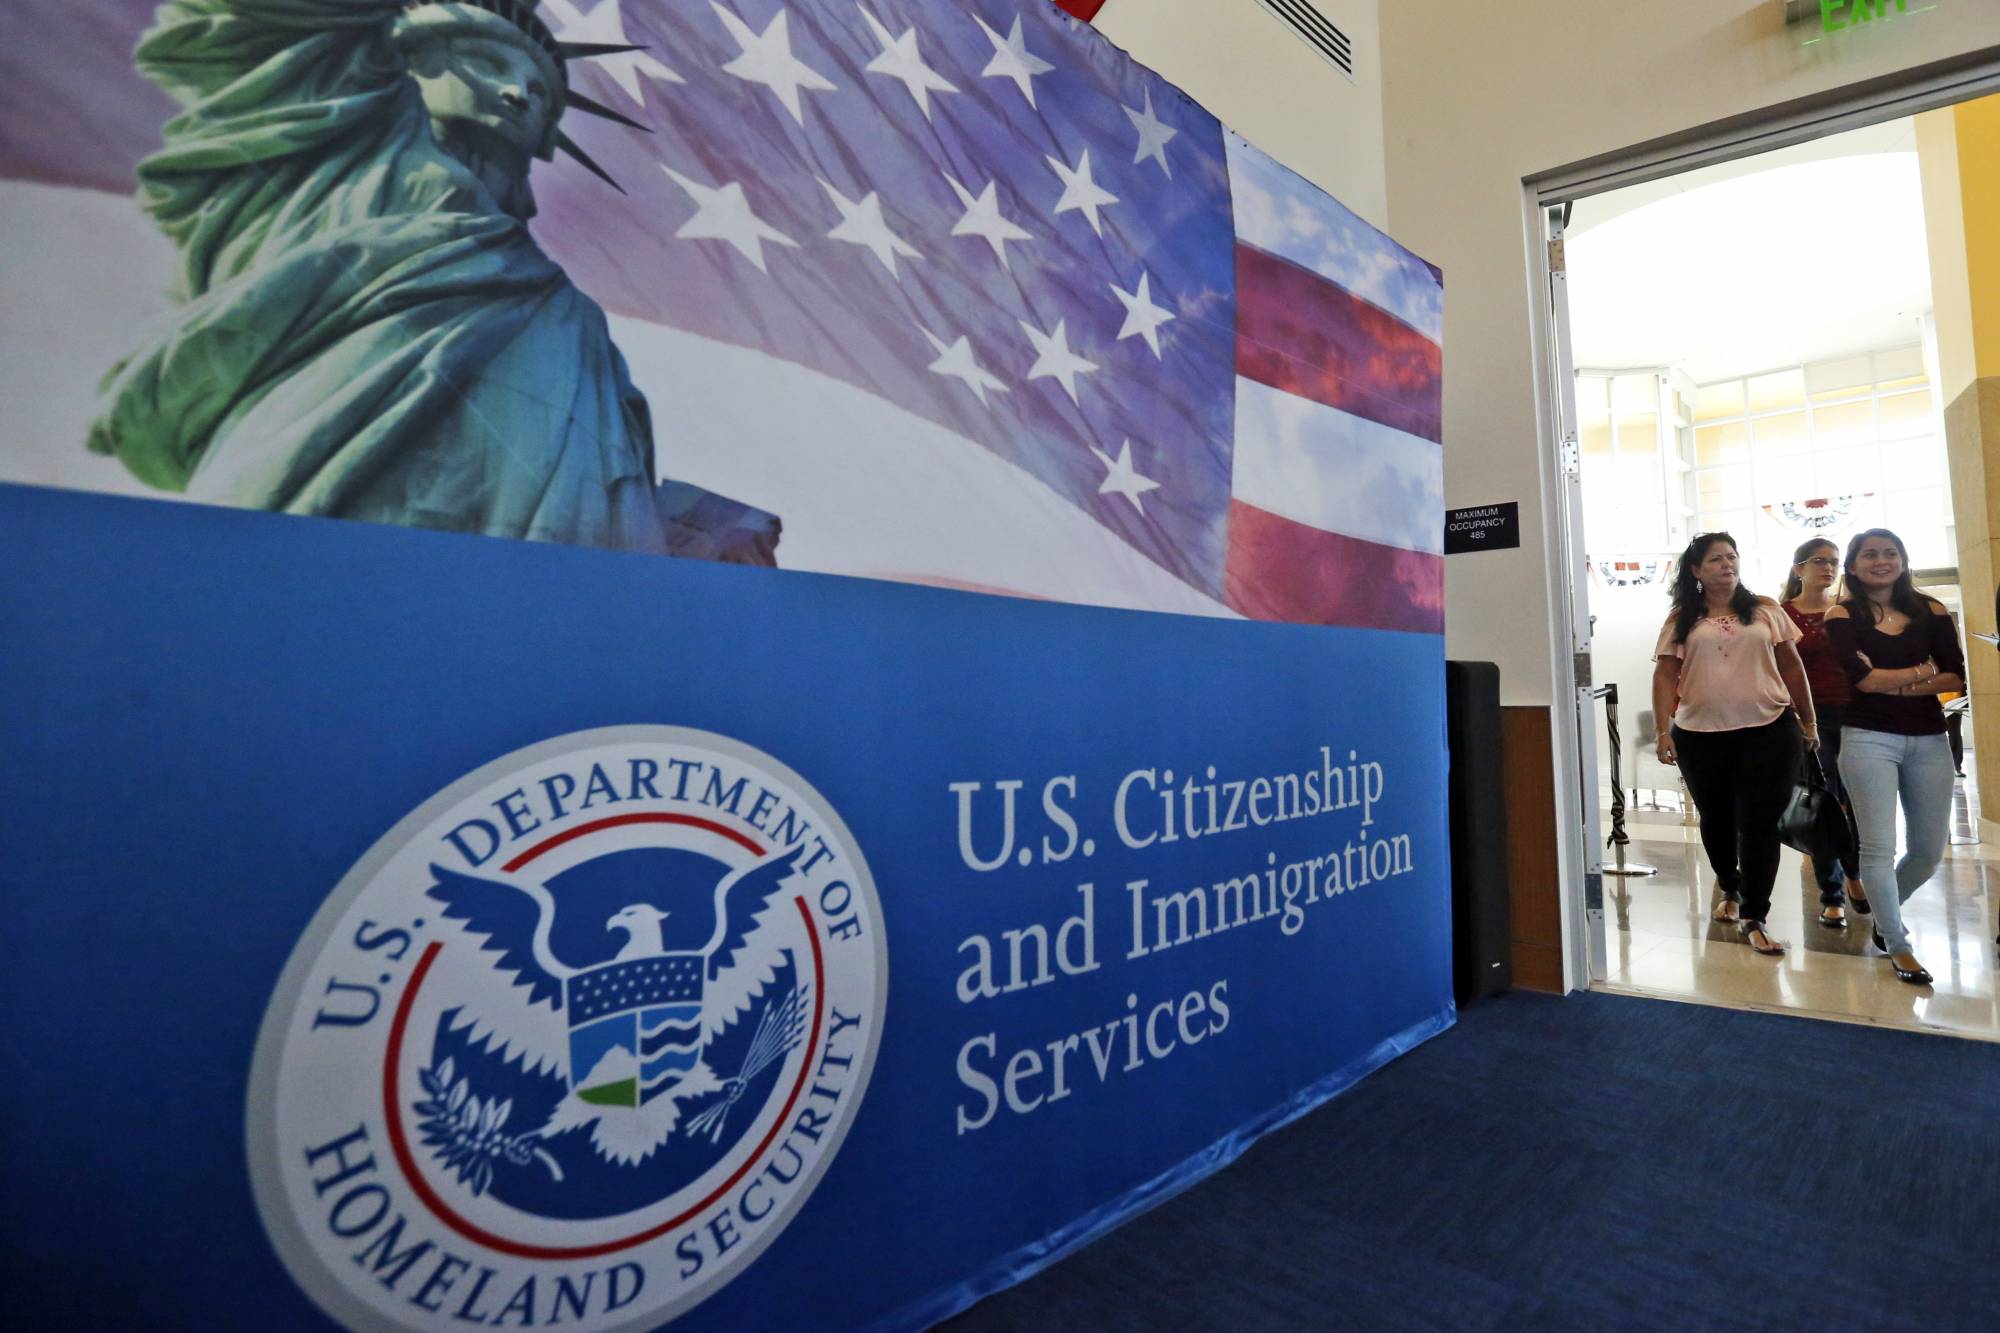 FILE - In this Aug. 17, 2018, file photo, people arrive before the start of a naturalization ceremony at the U.S. Citizenship and Immigration Services Miami Field Office in Miami. USCIS, The cash-strapped federal agency that oversees that nation's legal immigration system, scrapped plans Tuesday, Aug. 25, 2020, to furlough 13,000 employees, or nearly 70% of its workforce. The agency said it would maintain operations through September when the the fiscal year ends.  (AP Photo/Wilfredo Lee, File)